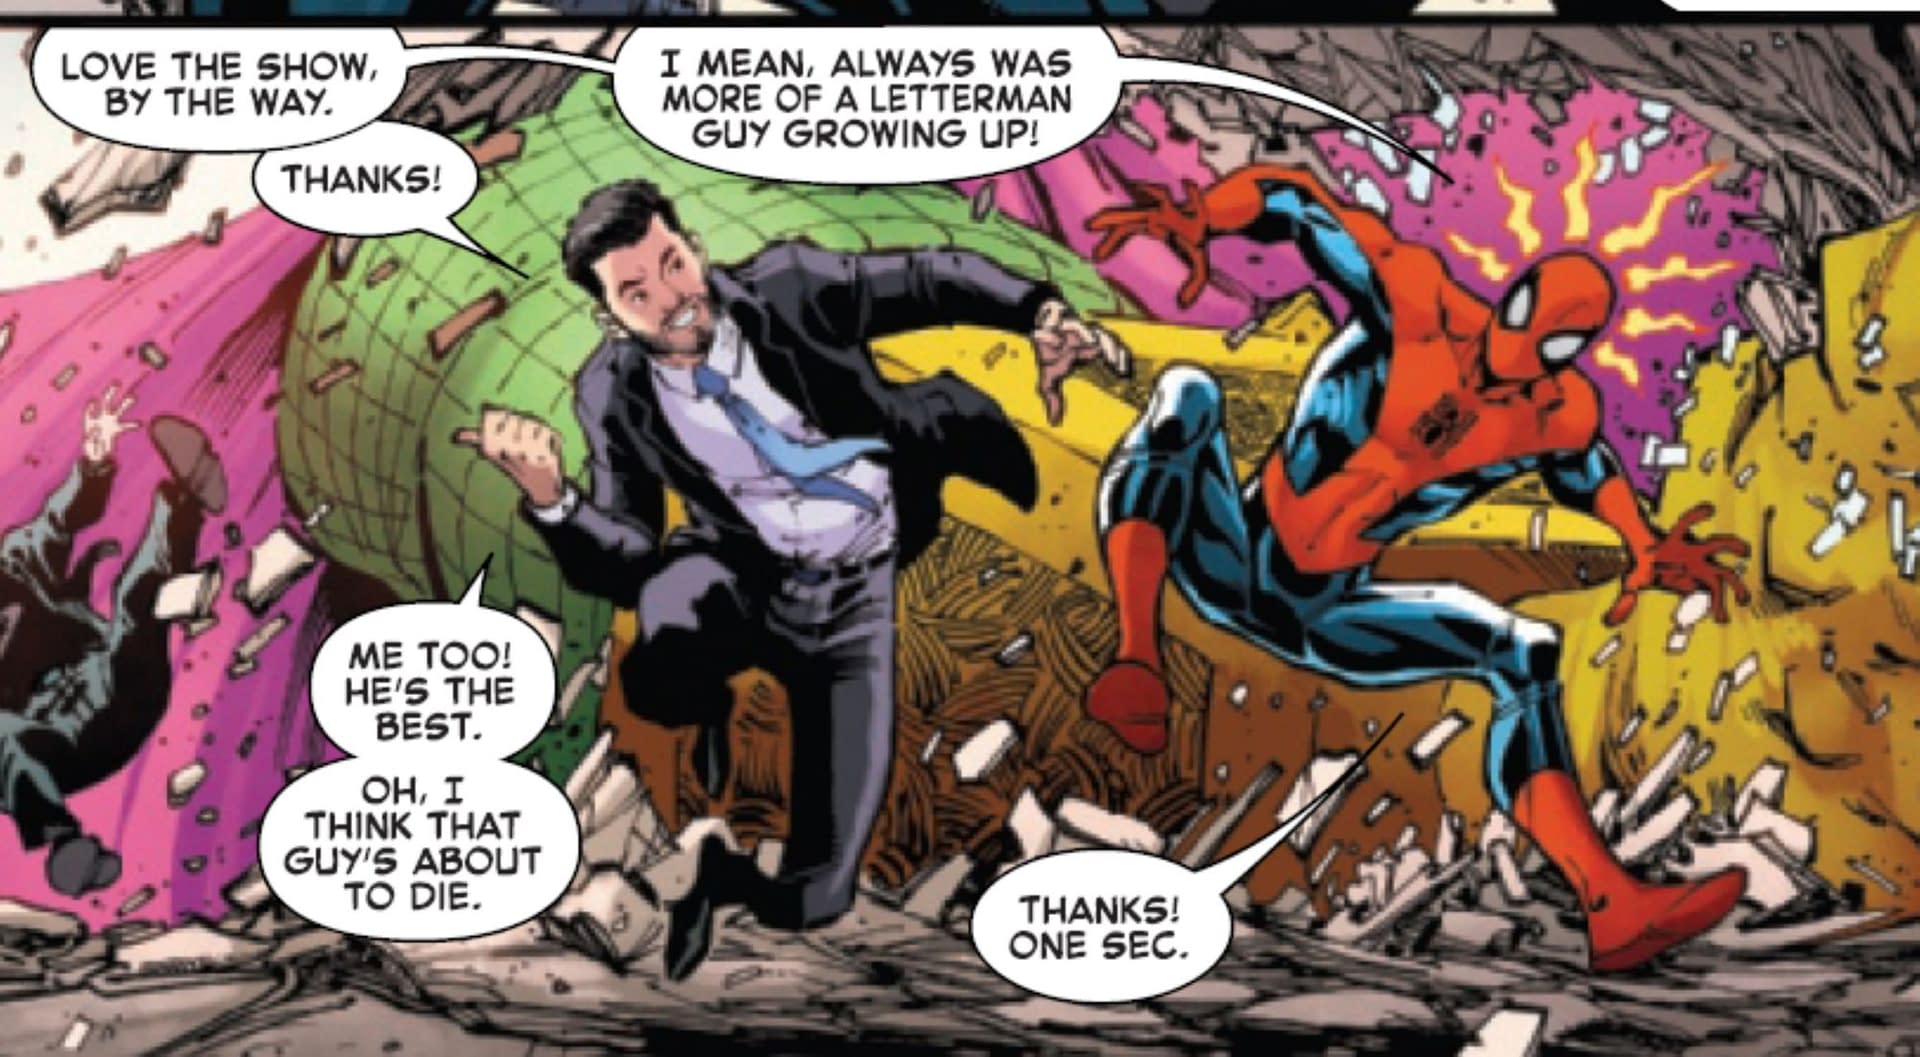 Amazing Spider-Man #900 introduces Peter Parker's secret admirer and  possibly the weirdest Marvel romance ever